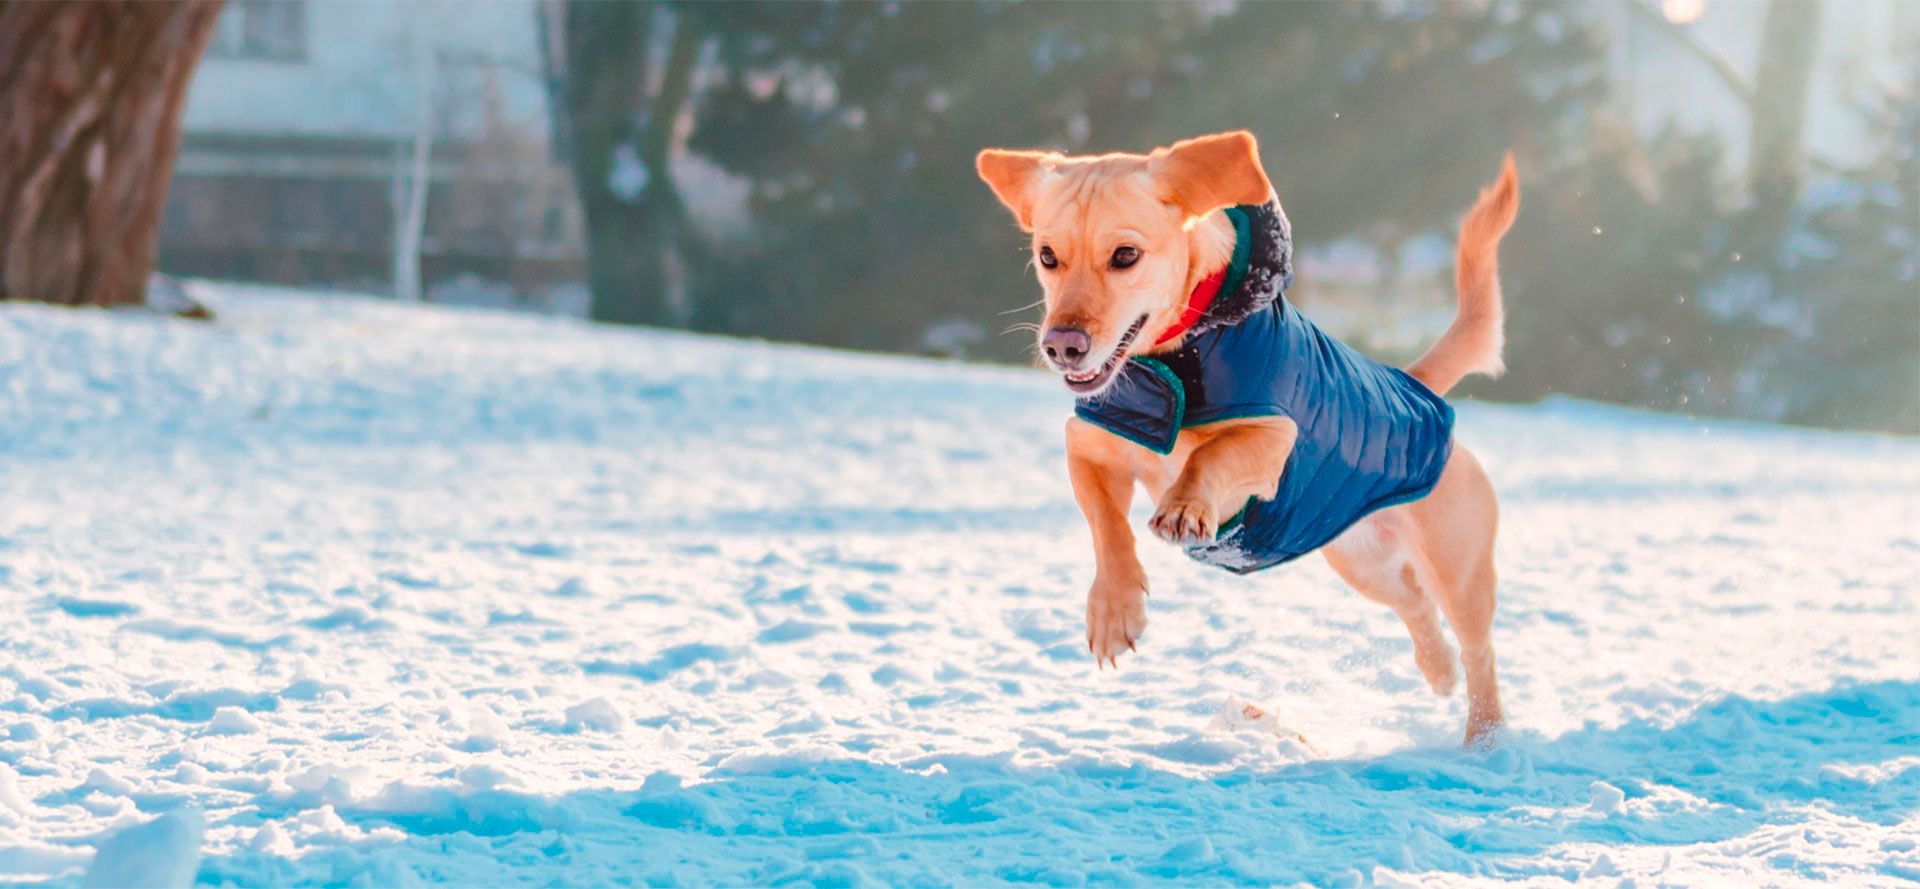 Dog jumping in best warm dog coat.